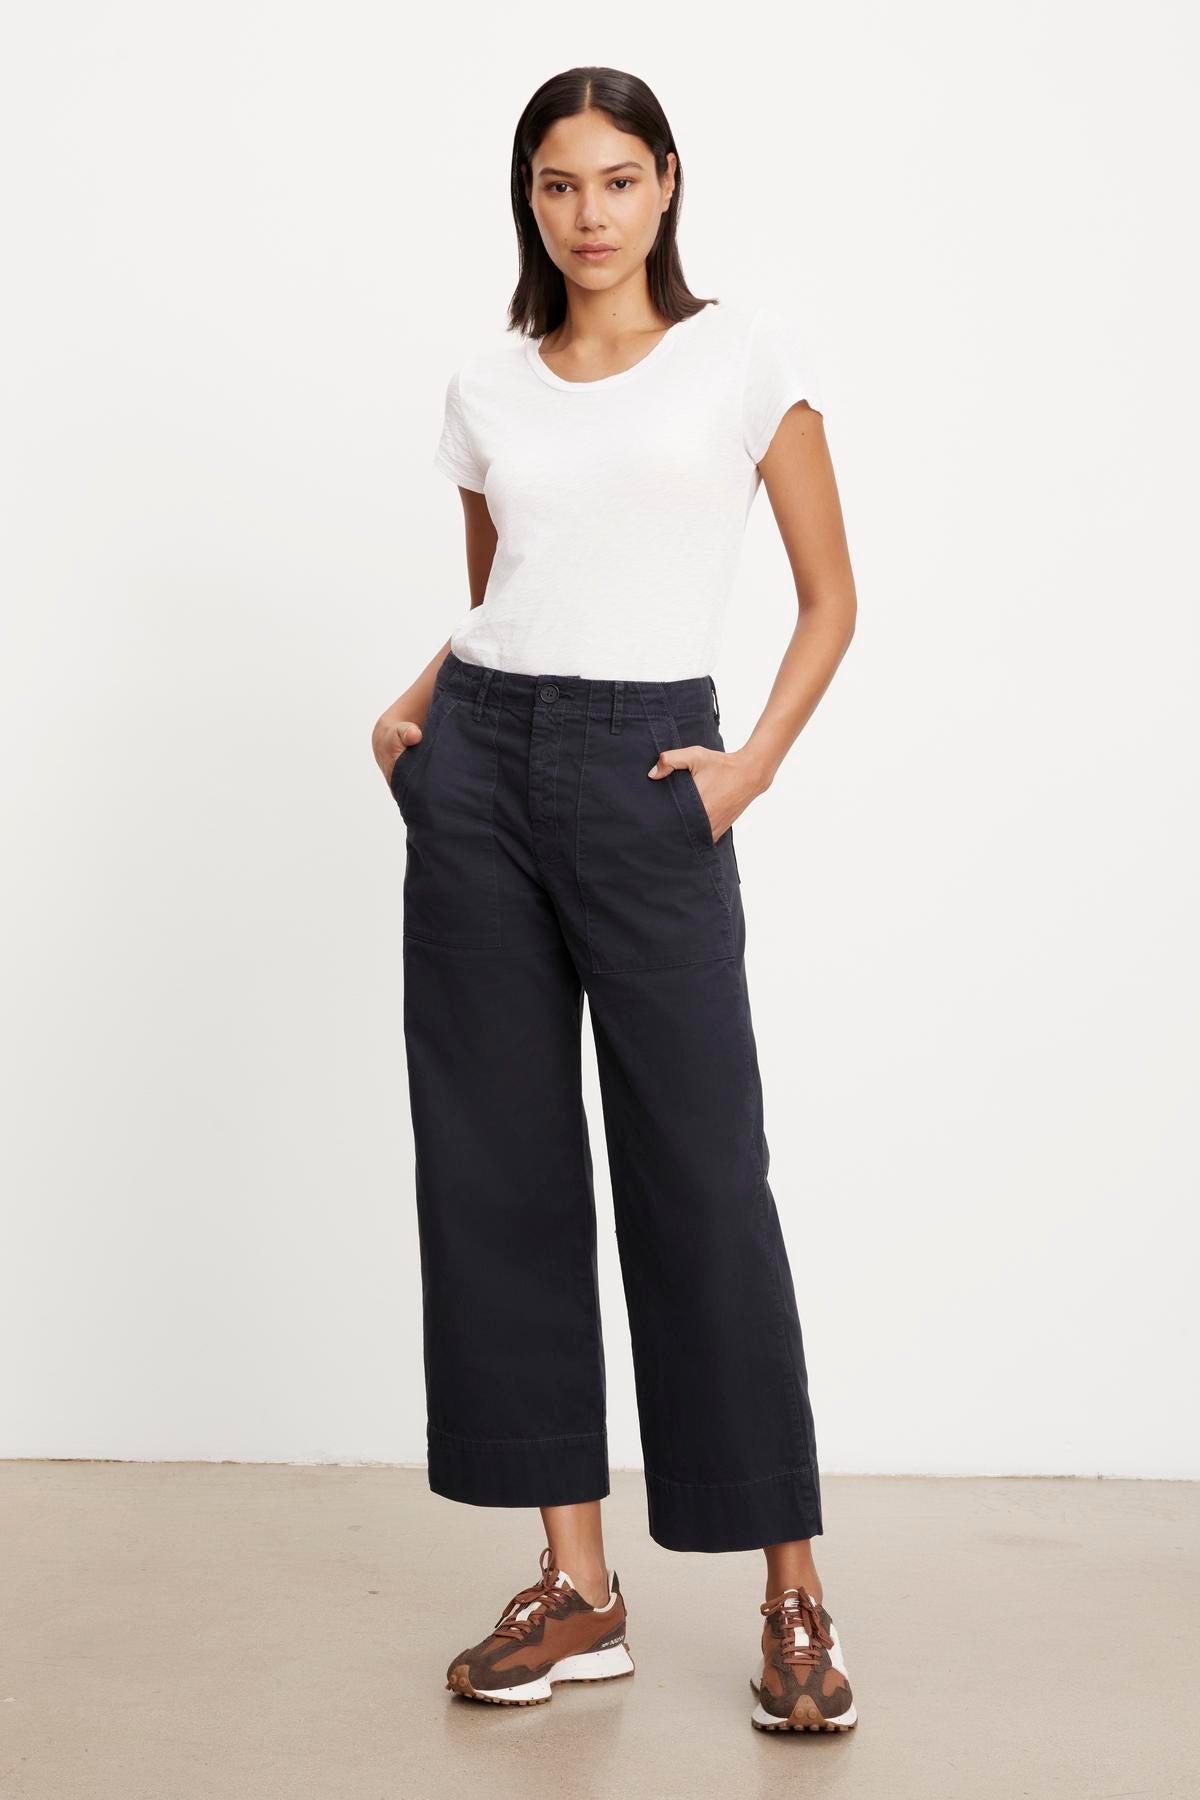 A woman standing in a neutral pose wearing a white t-shirt, Velvet by Graham & Spencer MYA COTTON CANVAS PANT wide-leg pants, and brown lace-up shoes.-36320657440961